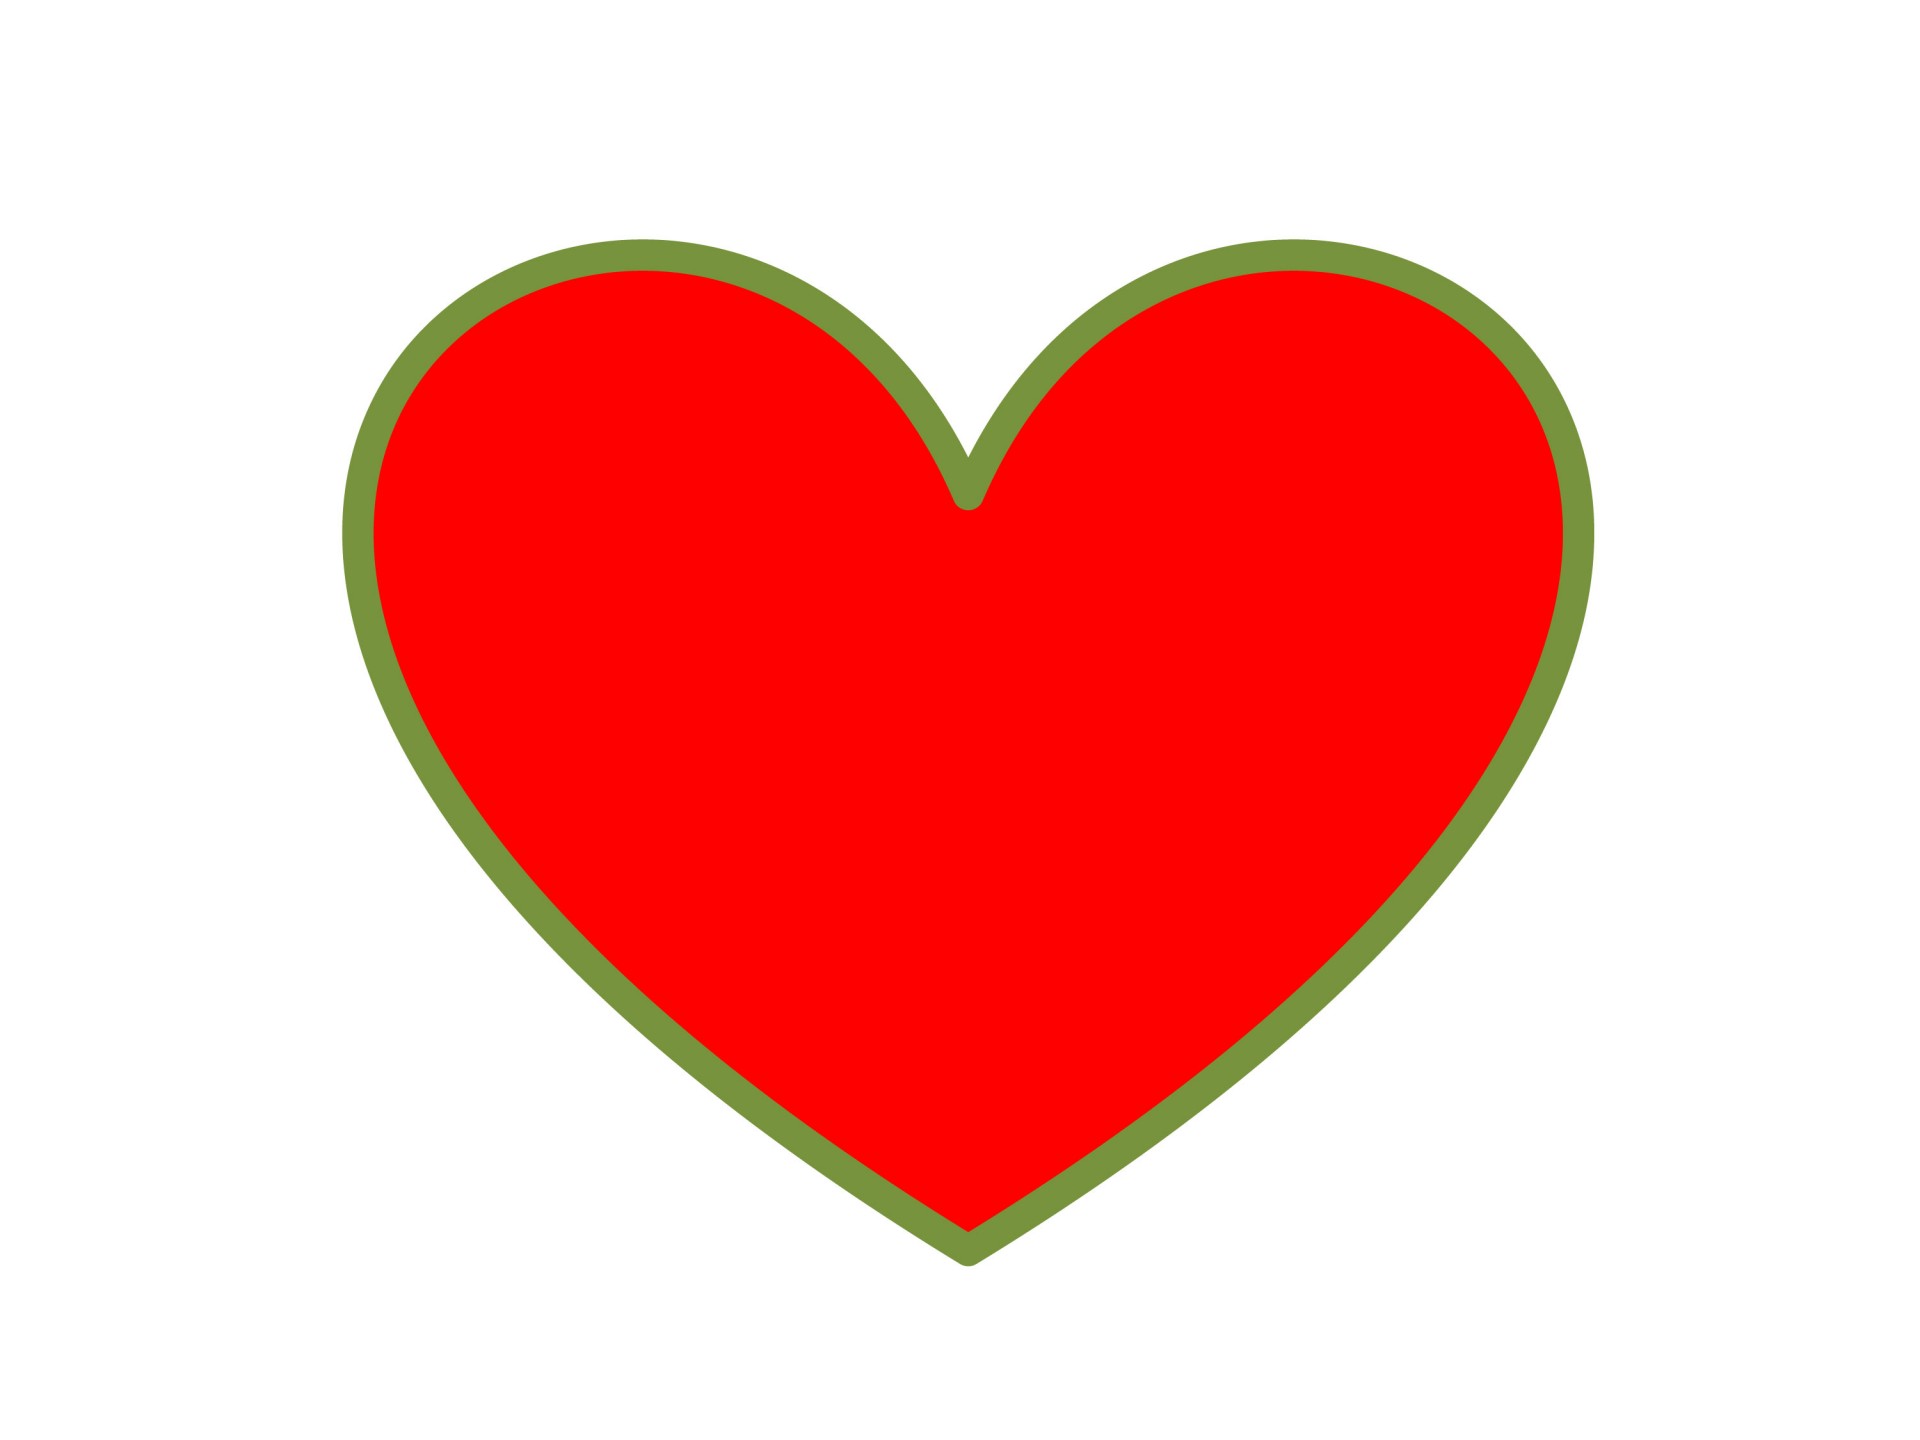 christmas-heart-red-green-background-free-image-from-needpix